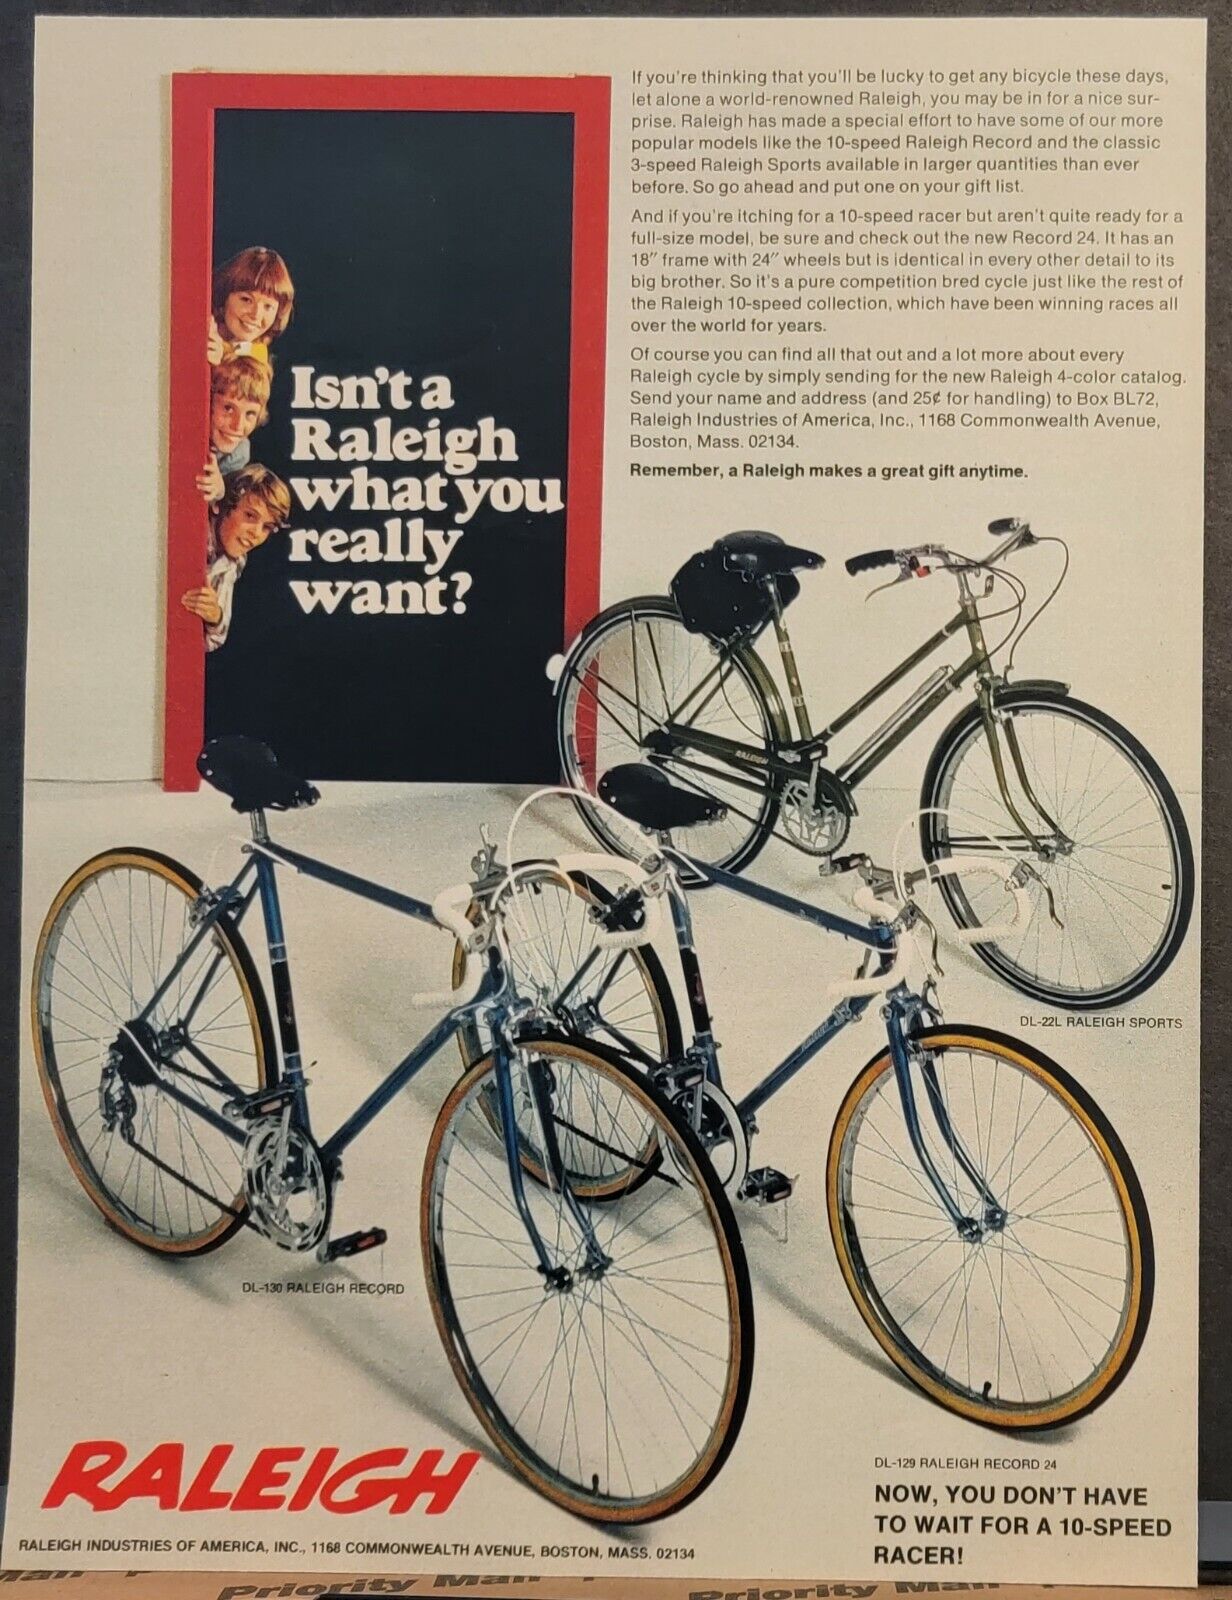 1972 Raleigh Bicycle Bike Print Ad 3 Speed Sports Model 10 Speed Record 24